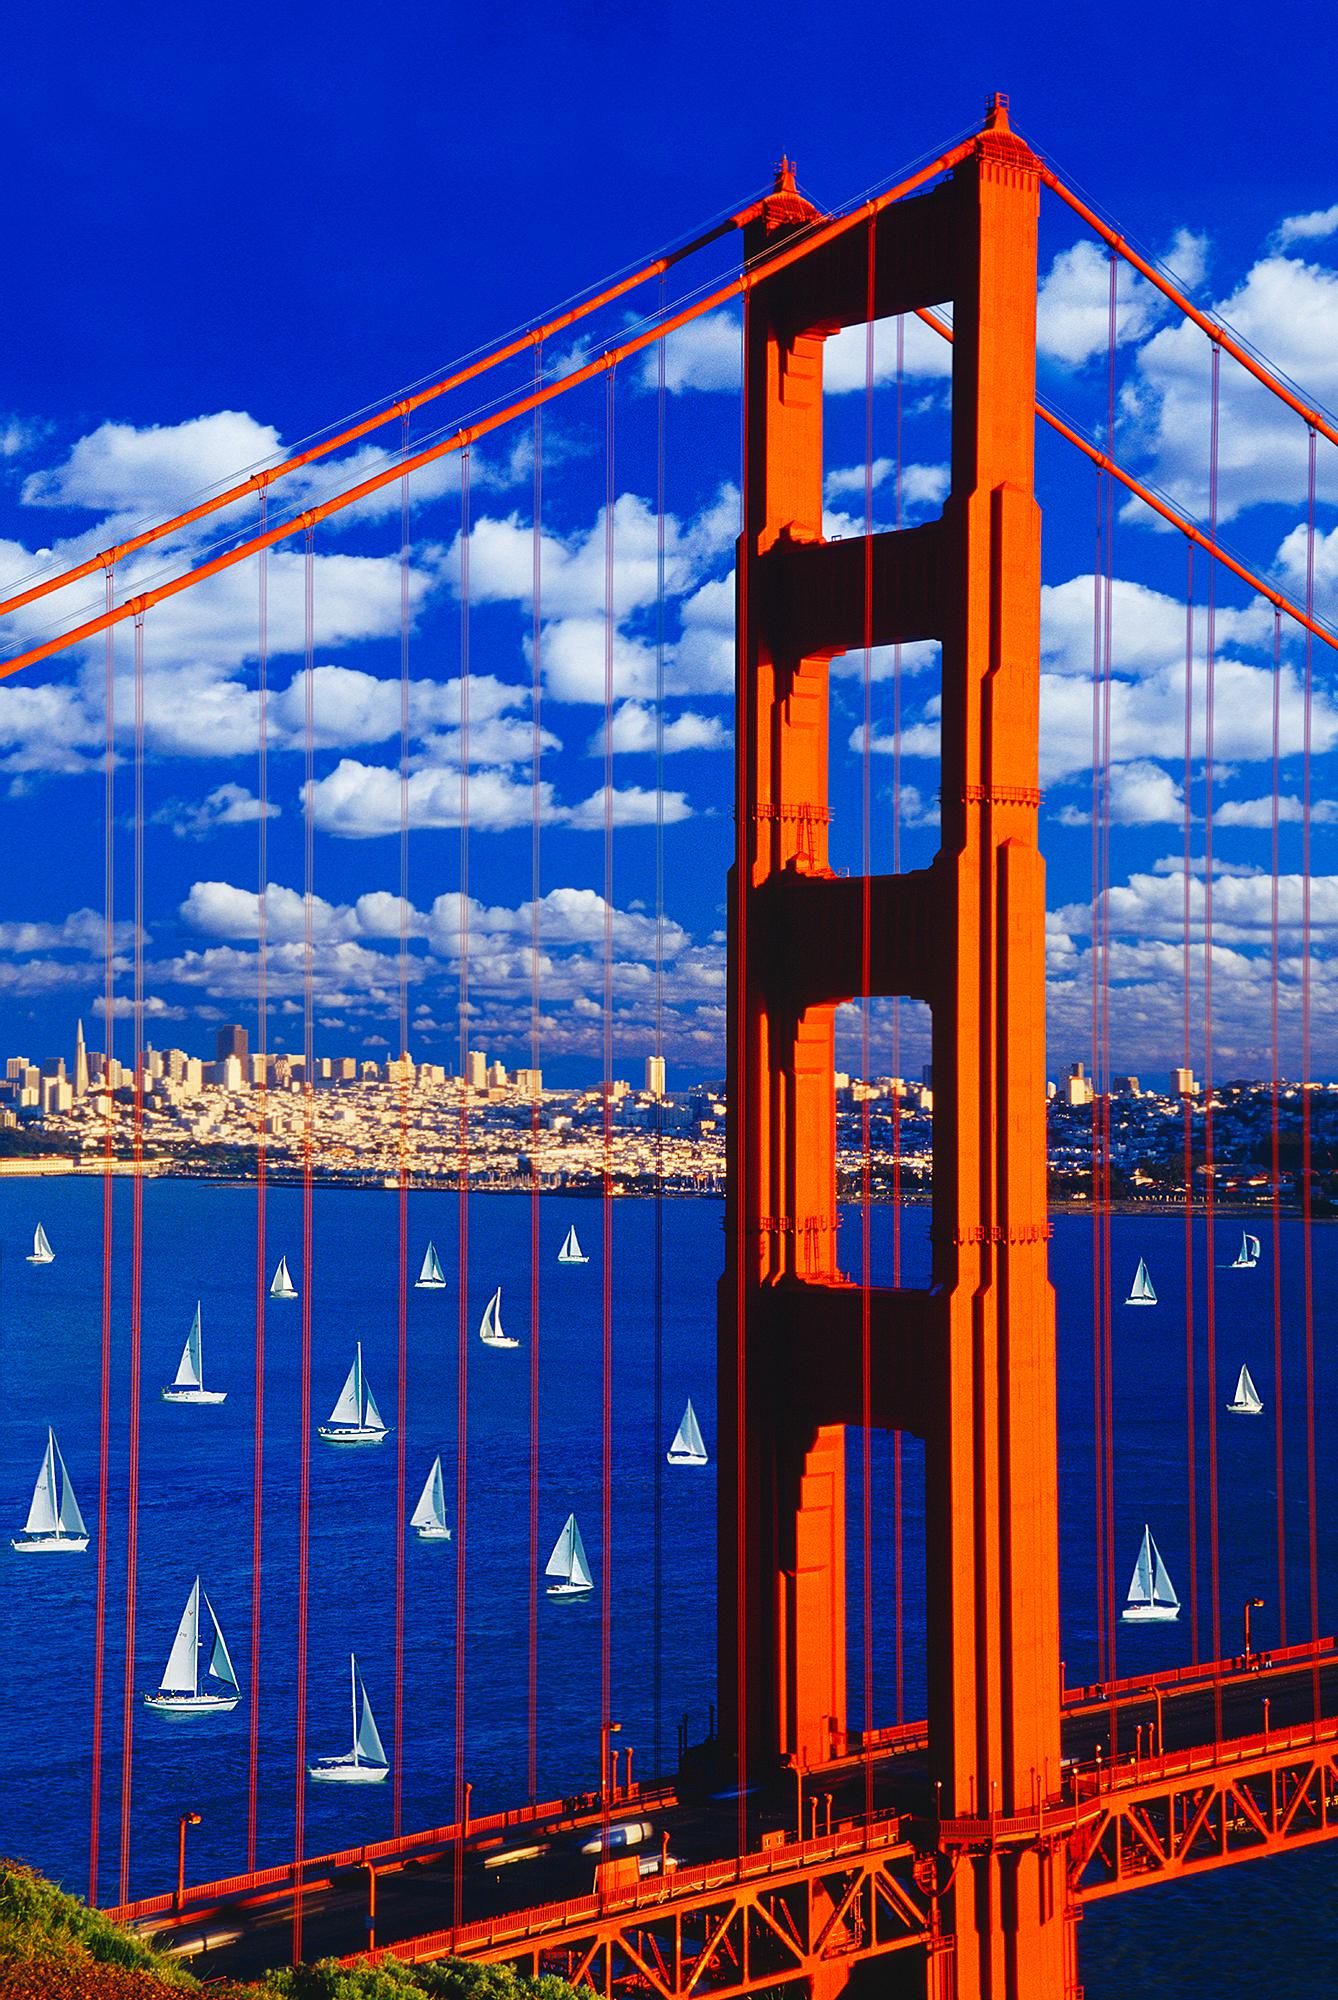 Mitchell Funk Landscape Photograph - Golden Gate Bridge with Sailboats and Clouds, Blue Sky, Fine Art Photography